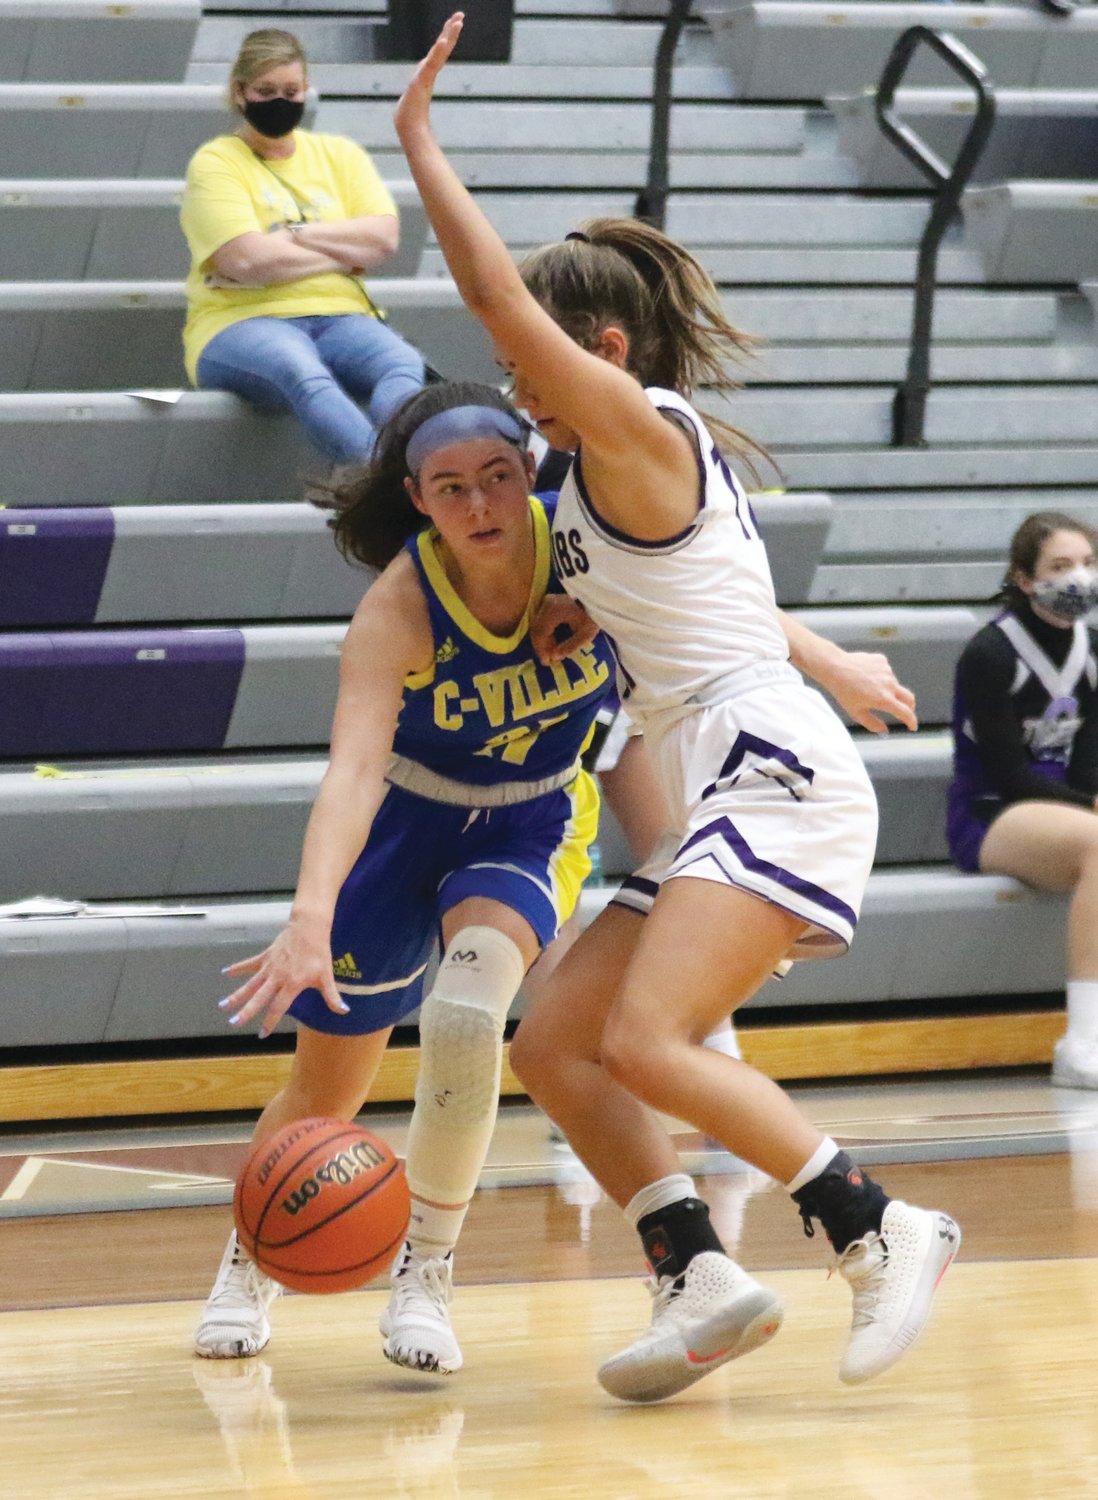 Crawfordsville's Liddy McCarty led the Athenians with nine points in a 60-23 loss to Greencastle.